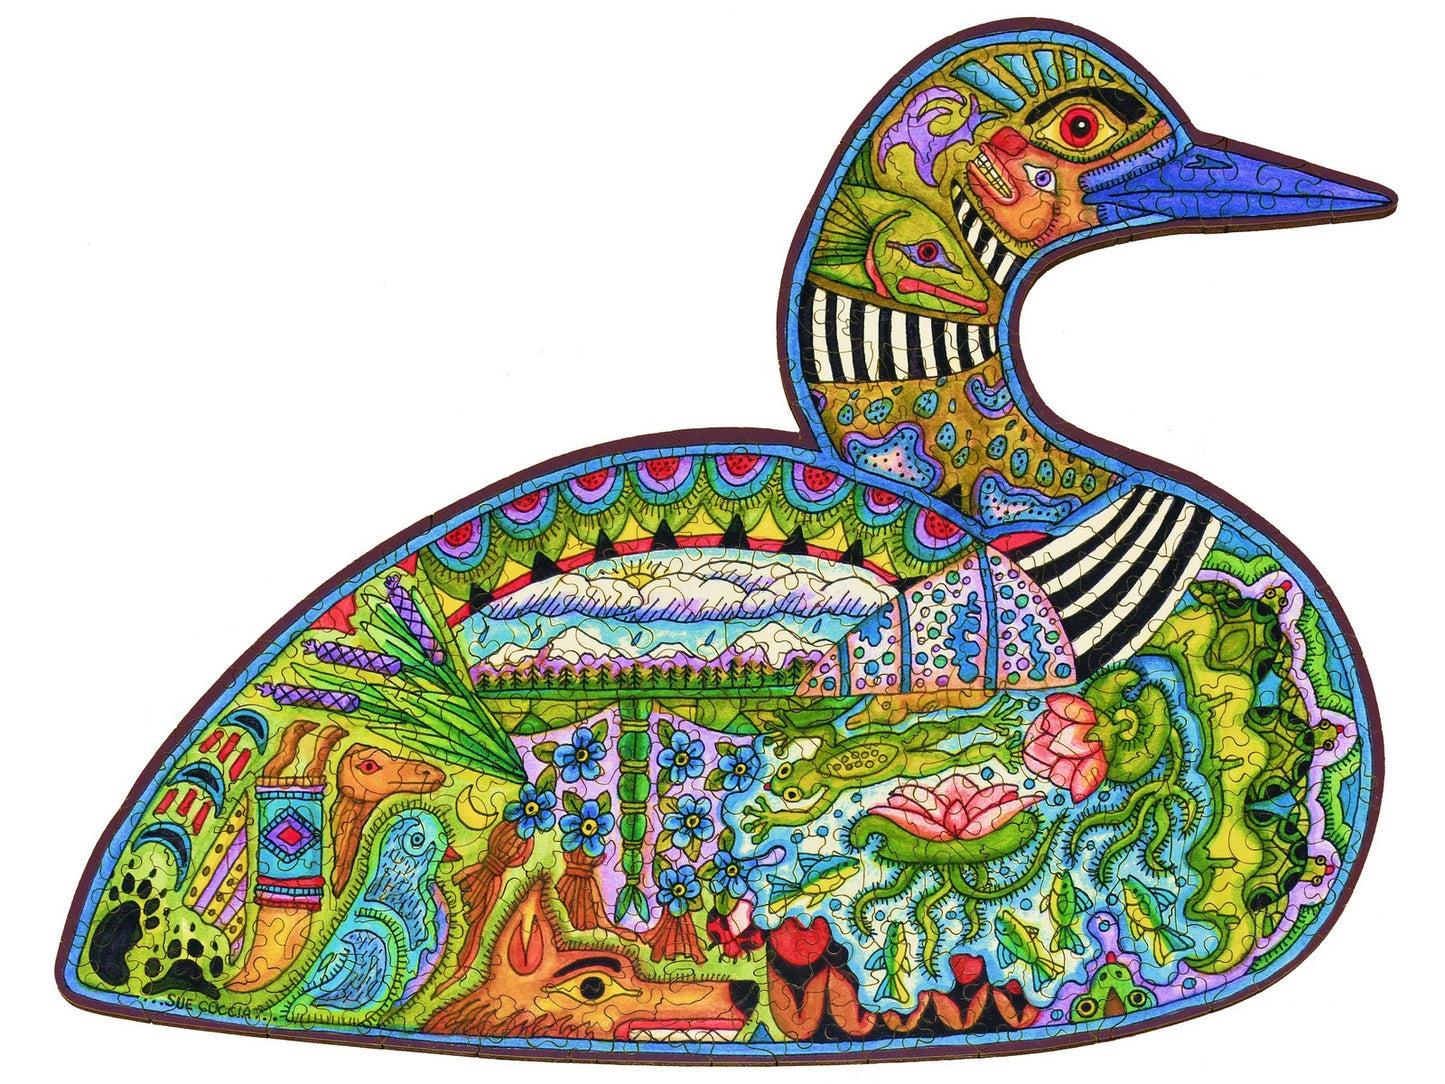 The front of the puzzle, Loon, which shows various plants and animals in the shape of a loon.